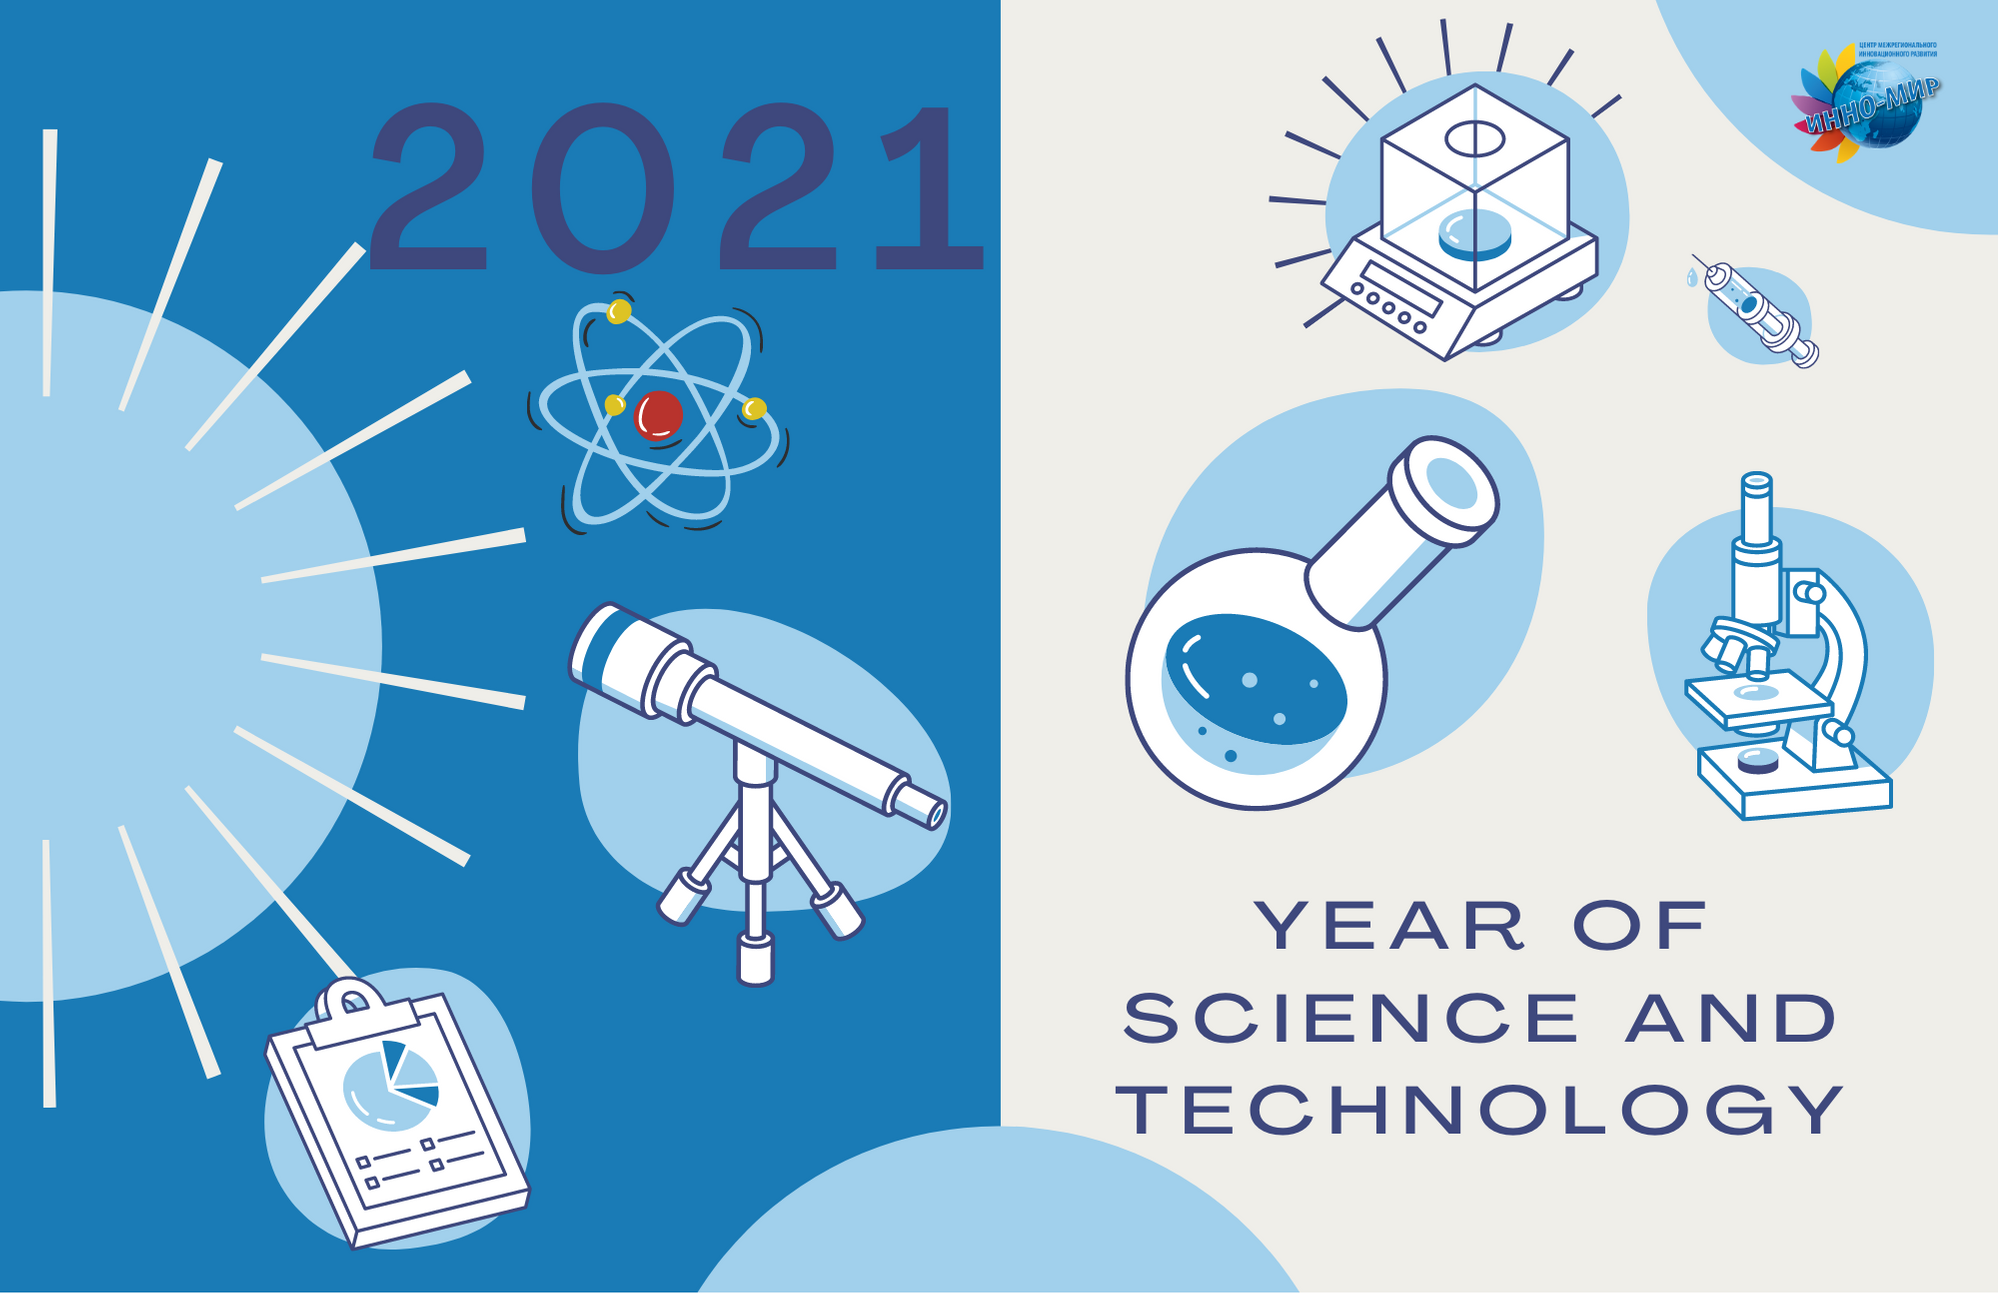 2021 - Year of Science and Technology